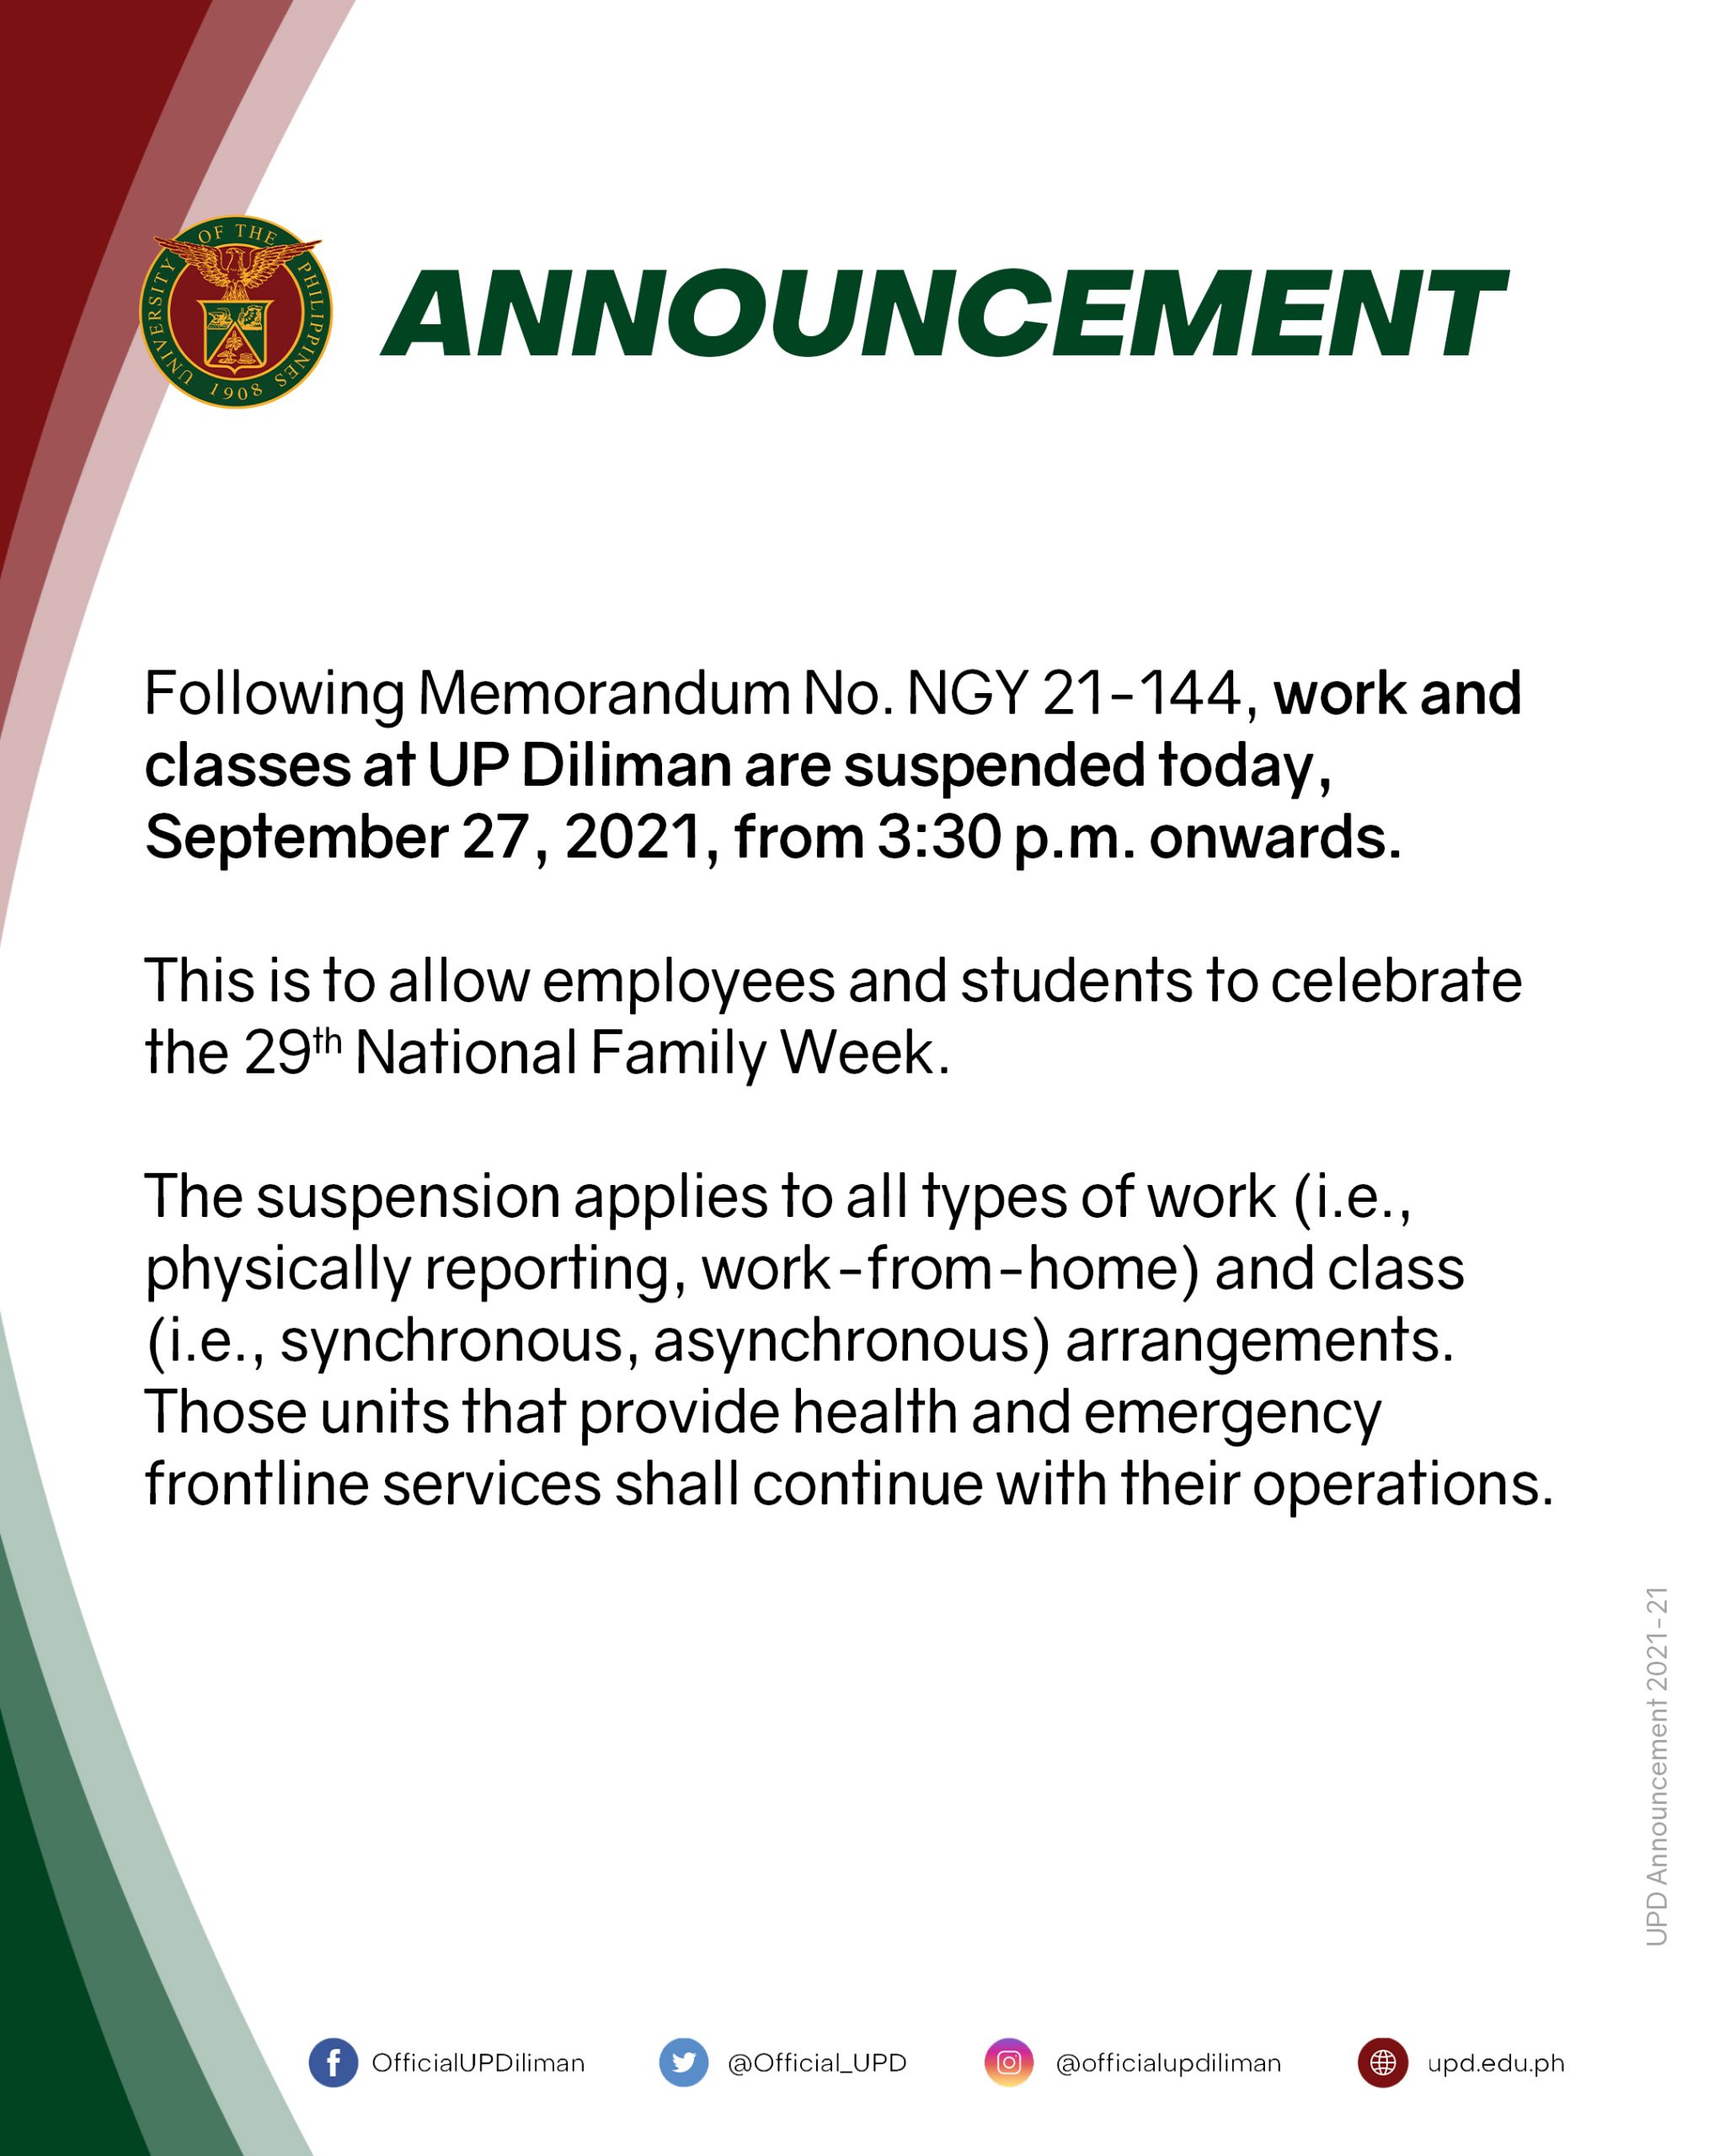 Work and classes are suspended today, September 27, 2021, from 3:30 p.m.  onwards - University of the Philippines Diliman